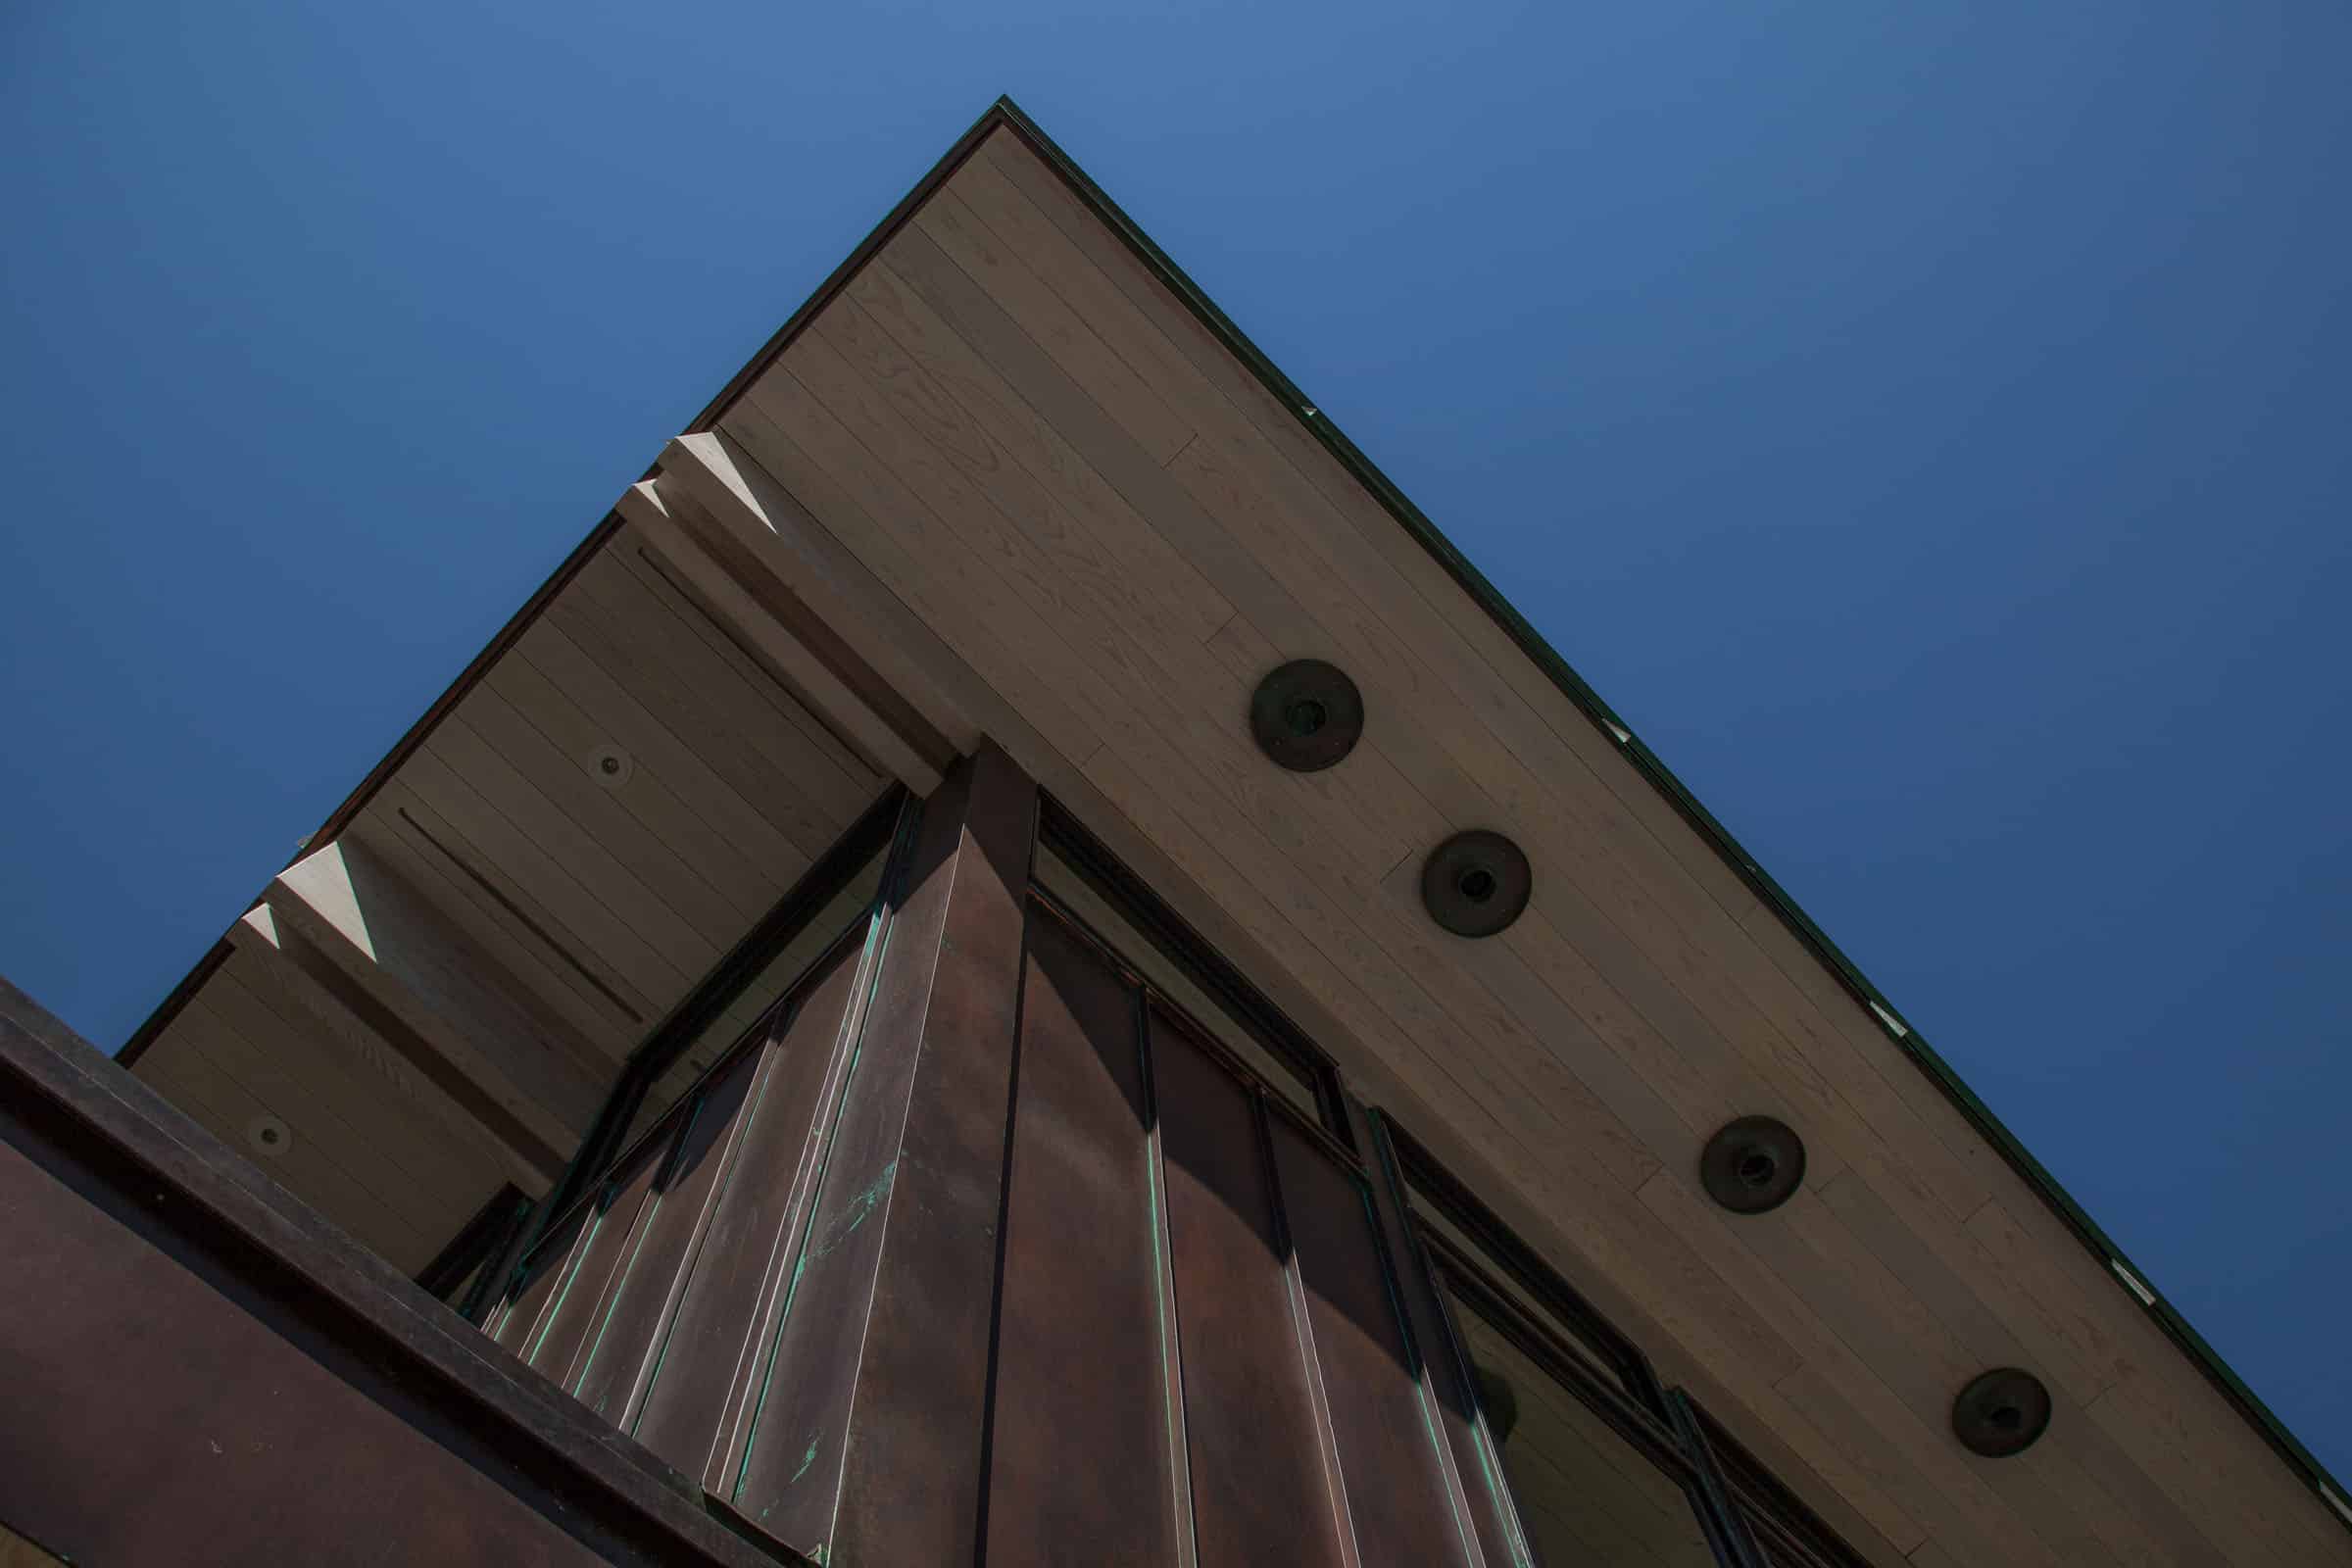 At QB Corporation, we take immense pride in our role as part of this project, providing high-quality Architectural Custom Glued Laminated Timber.